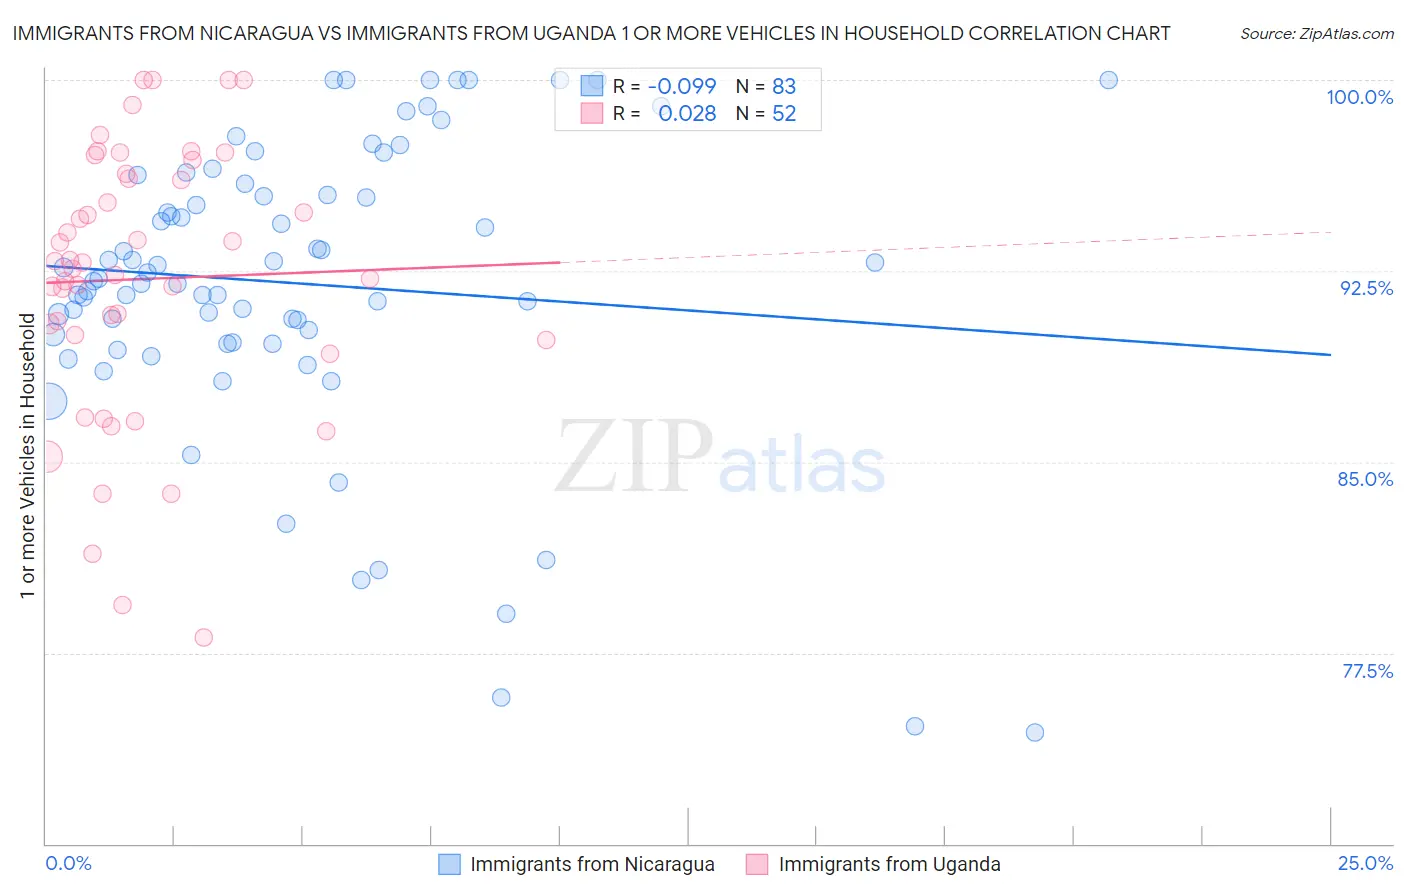 Immigrants from Nicaragua vs Immigrants from Uganda 1 or more Vehicles in Household